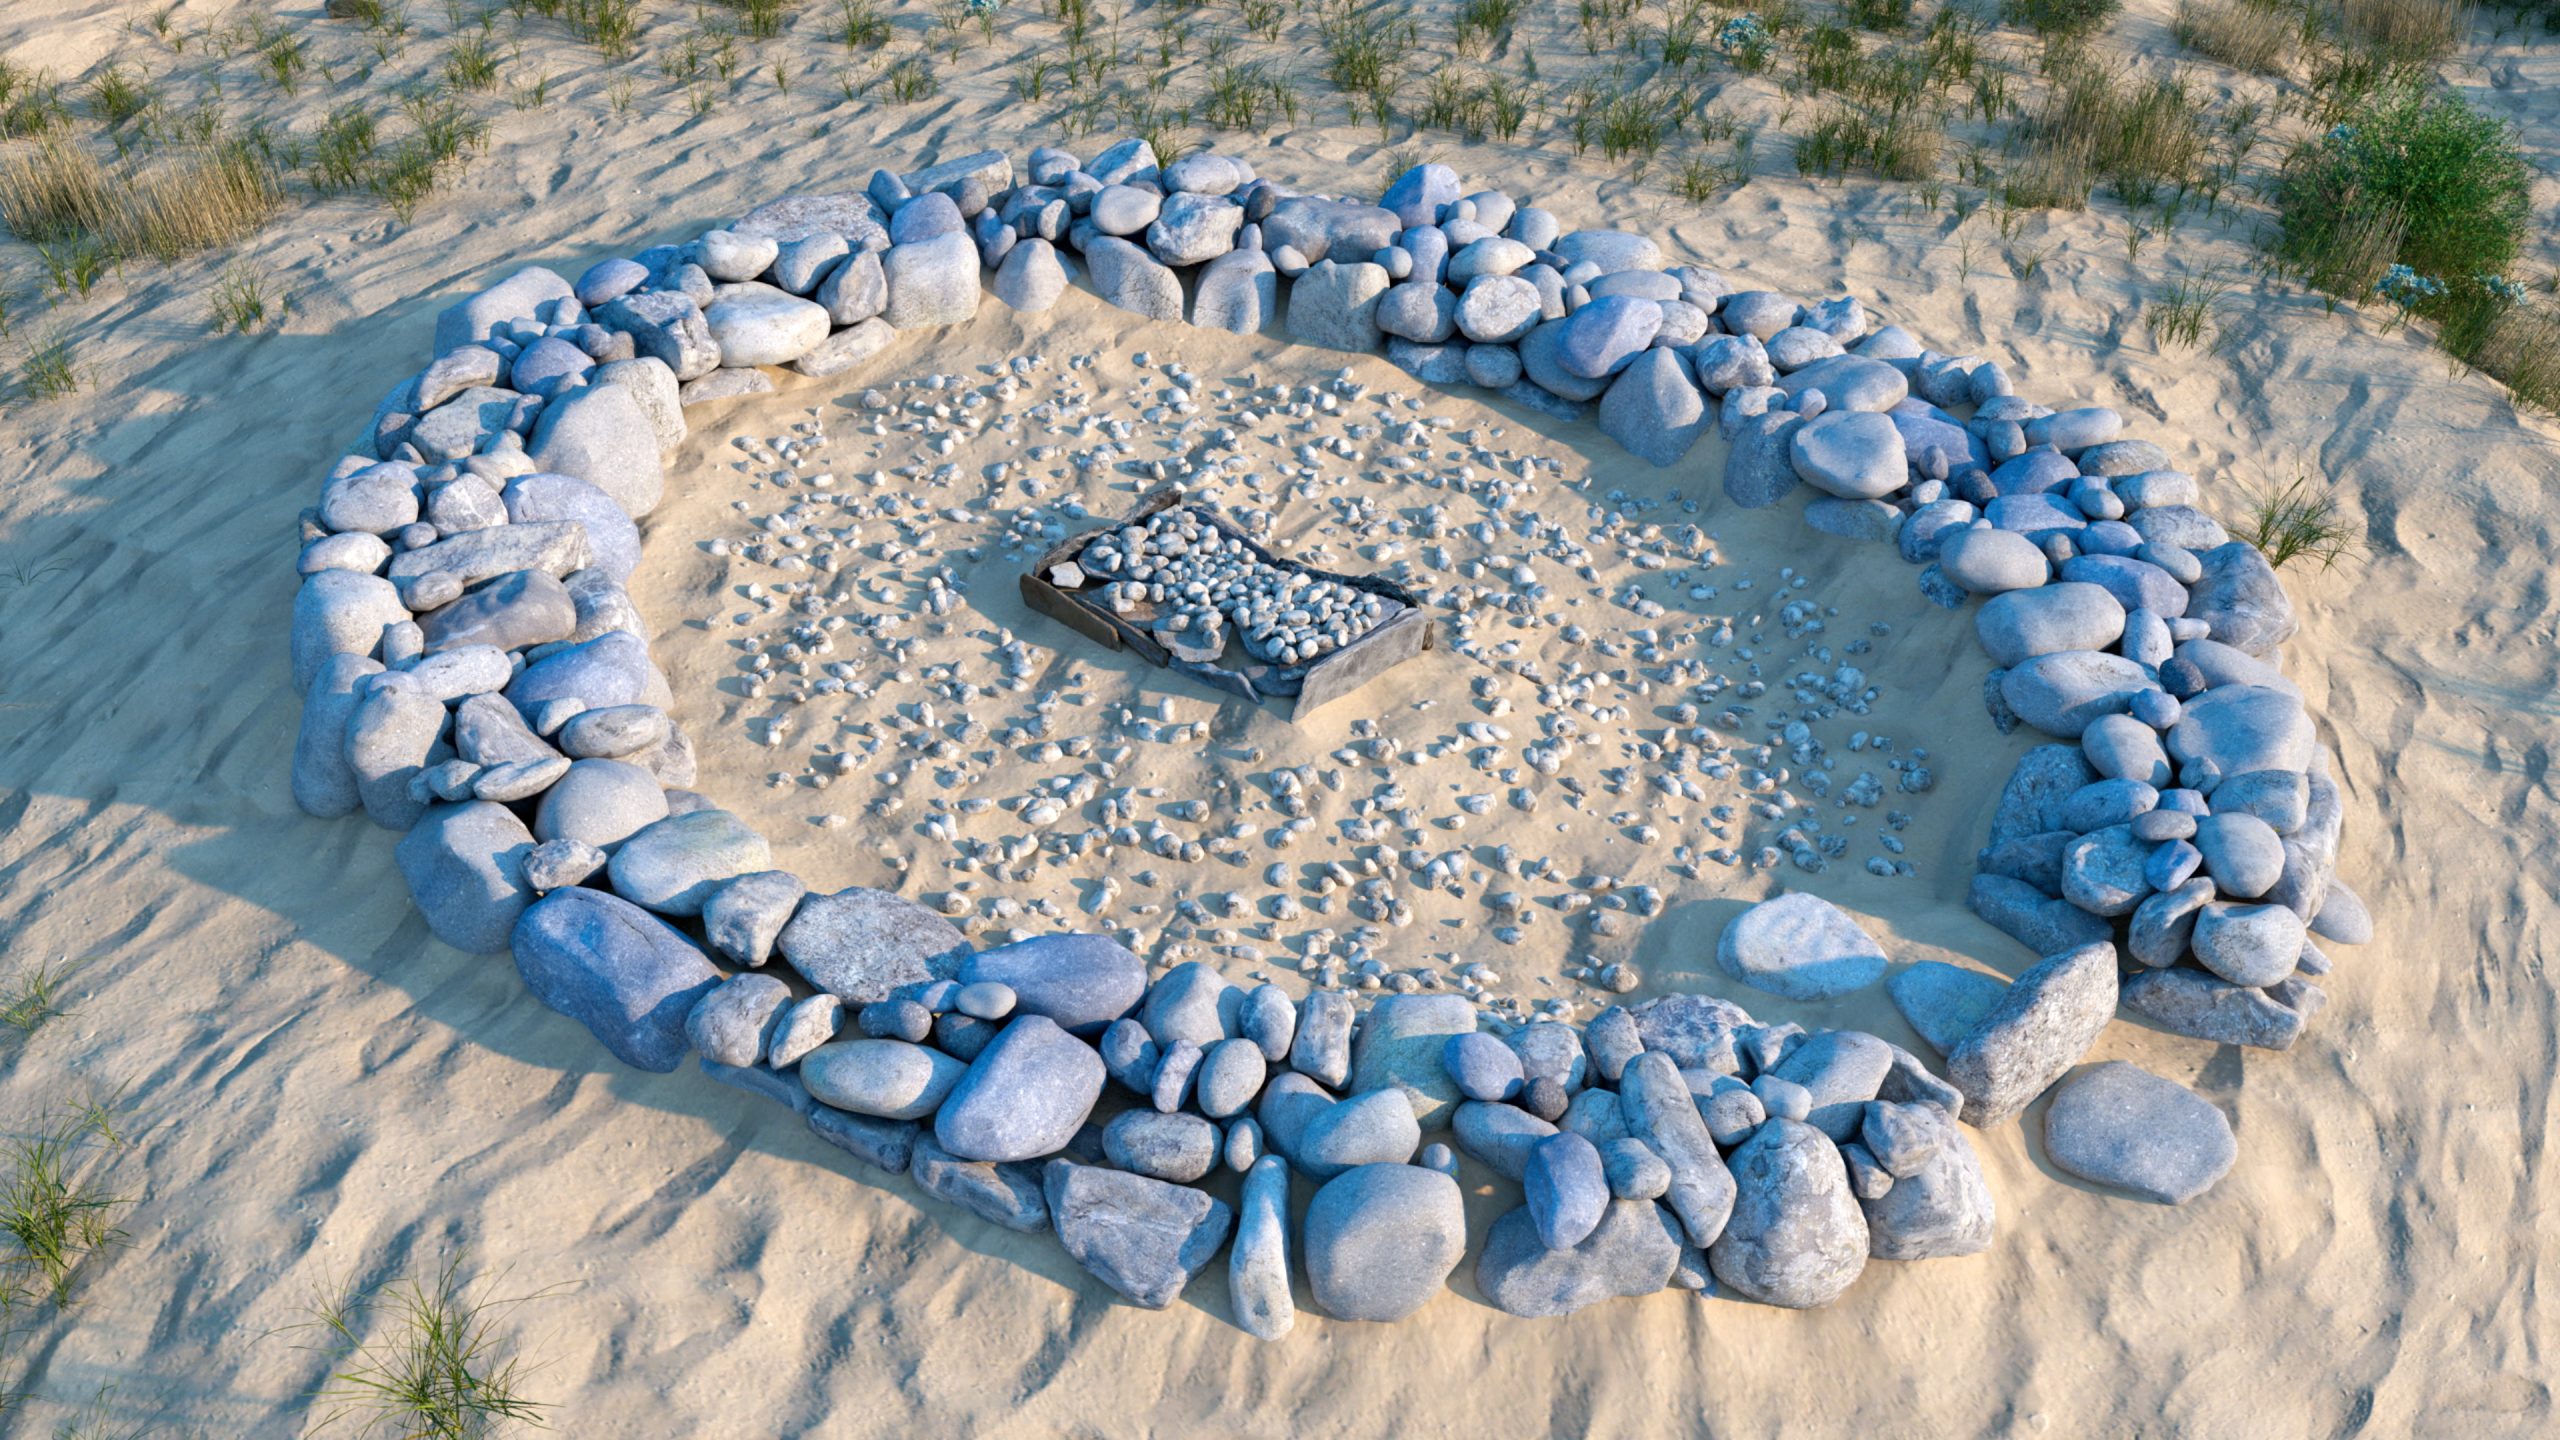 Computer generated reconstruction of an oval stone enclosure with a central, rectangular structure. Location depicted is St Patrick's Chapel, Whitesands, St Davids